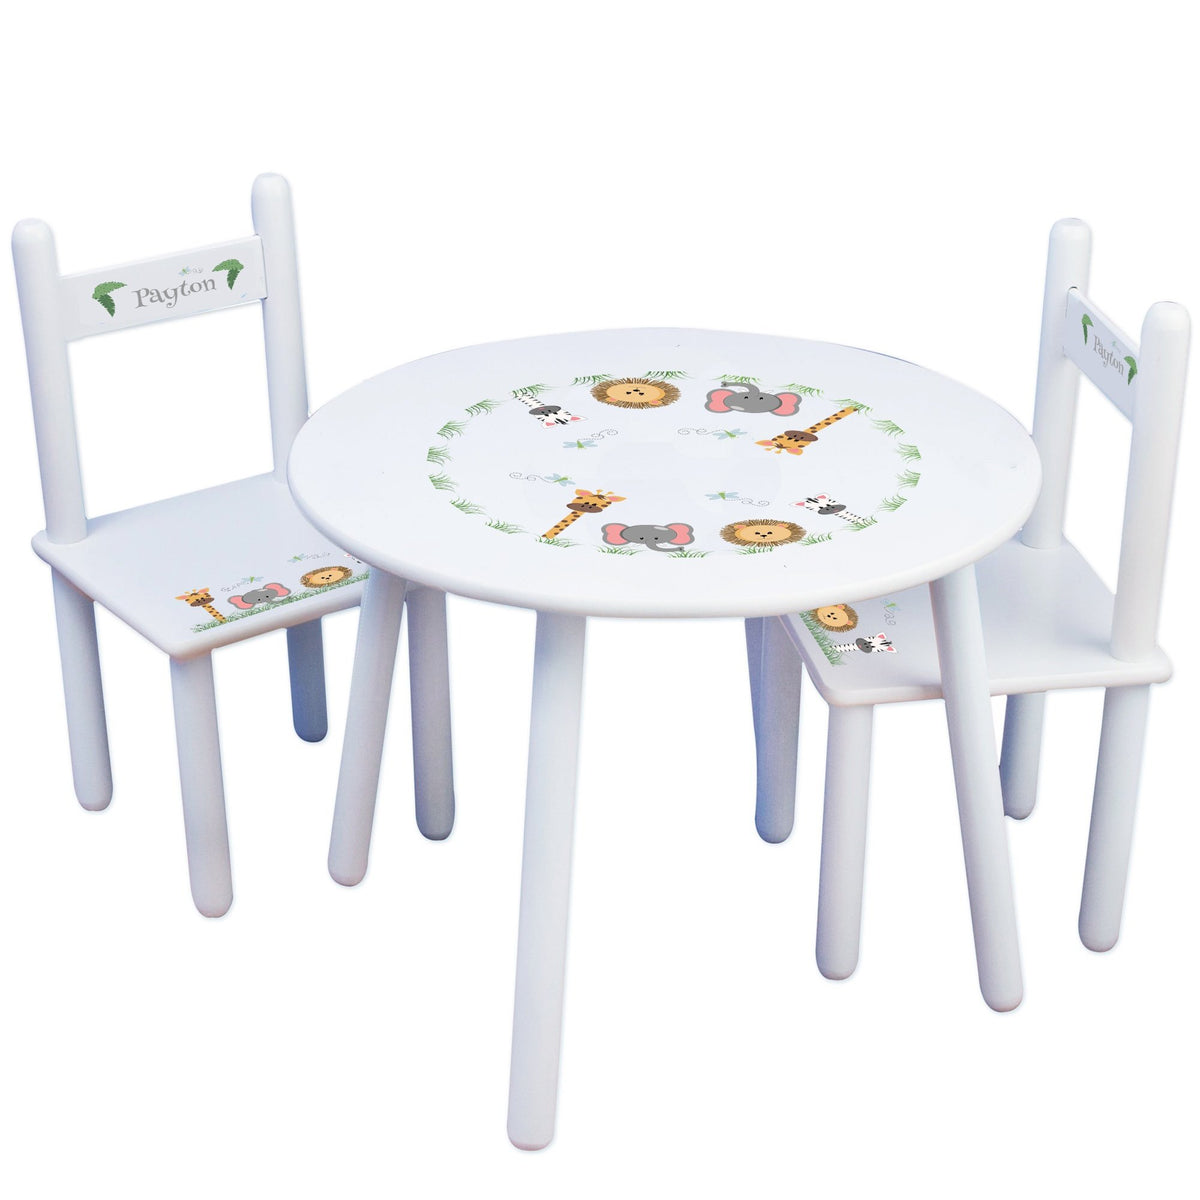 Kids tables and chairs: Best wooden sets and customisable pieces